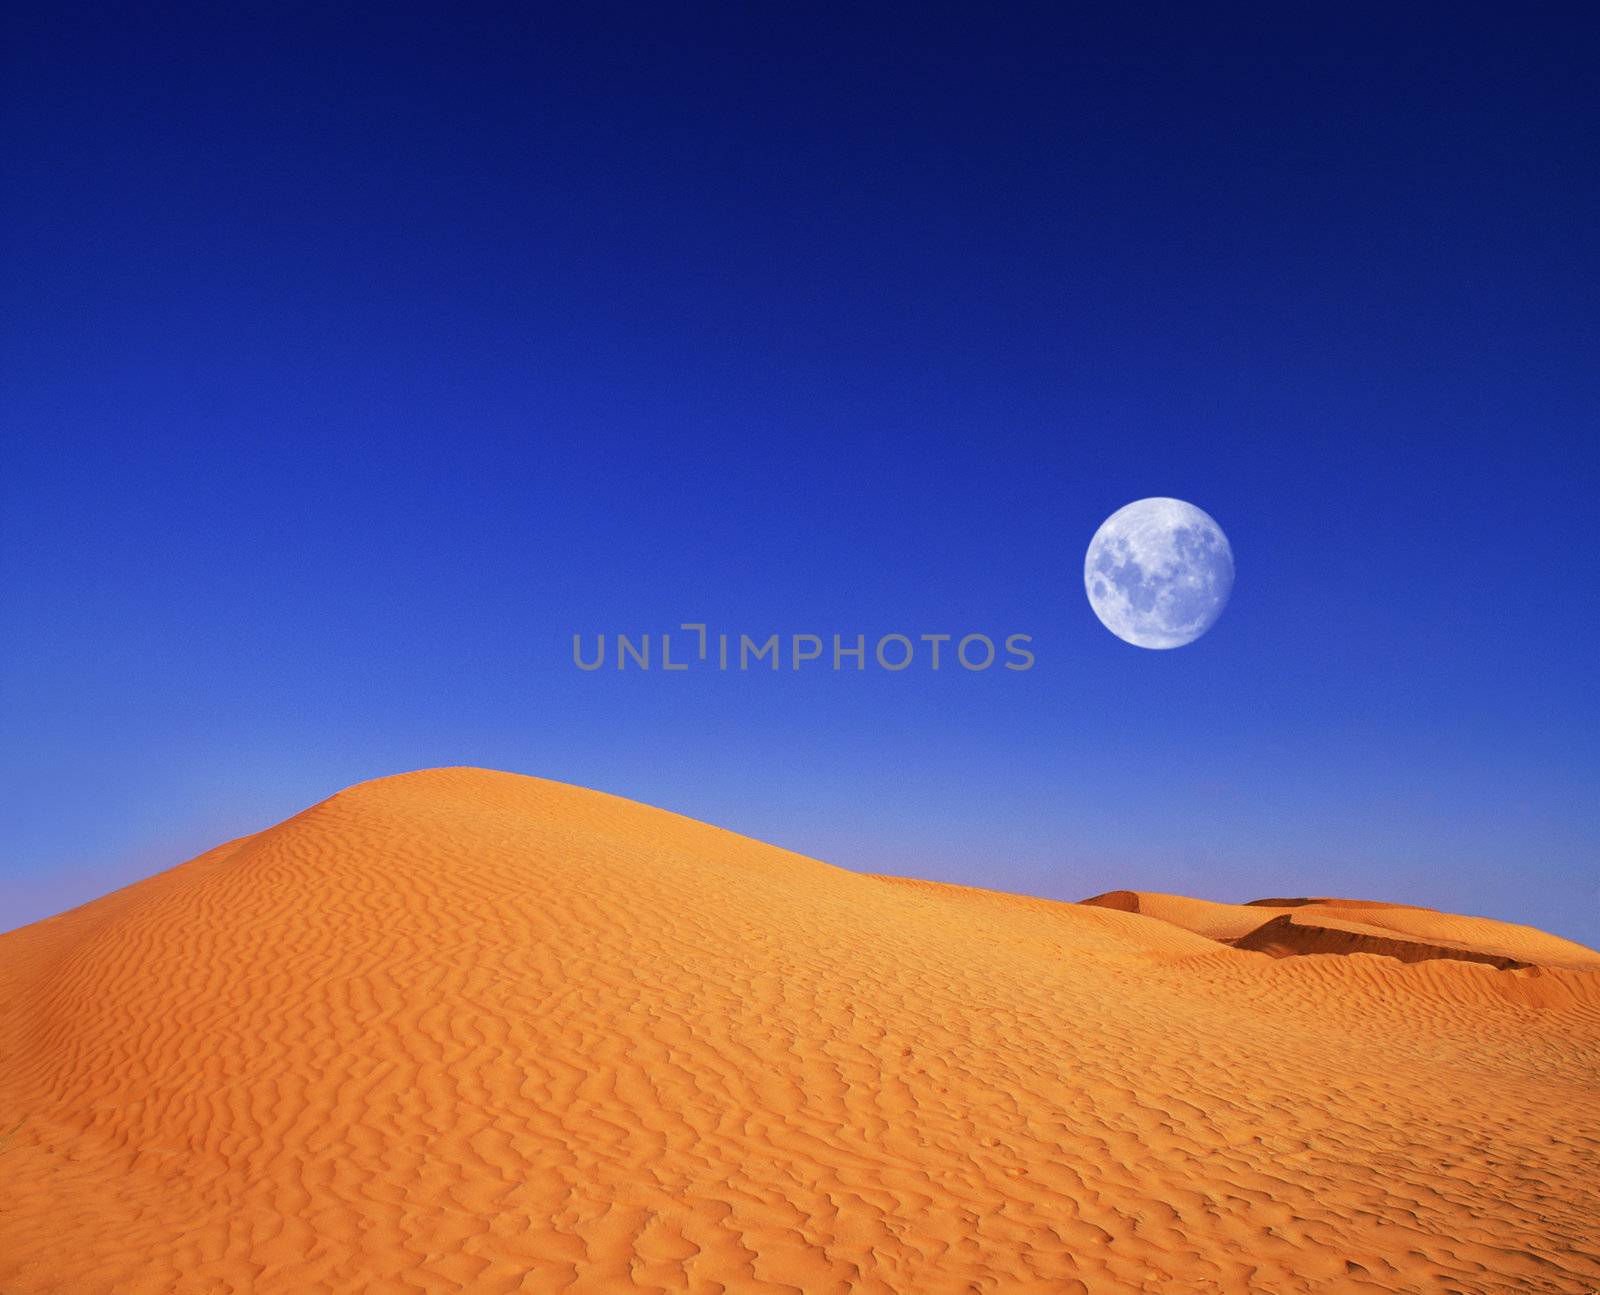 moon at night in africa just a minute away by photochecker